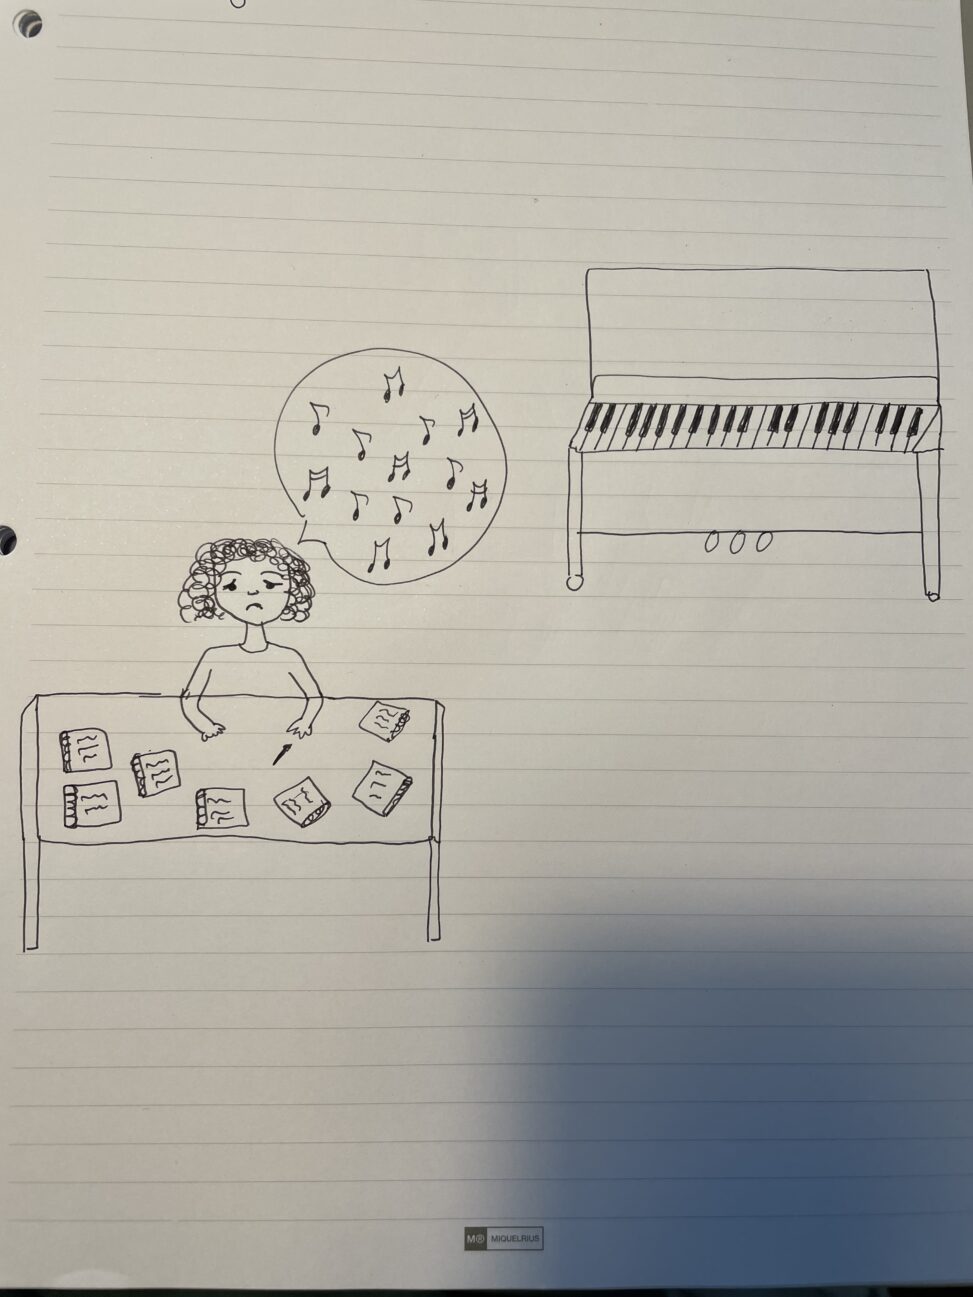 Since university started, I have a lot to study so I can hardly make time for music and practicing piano